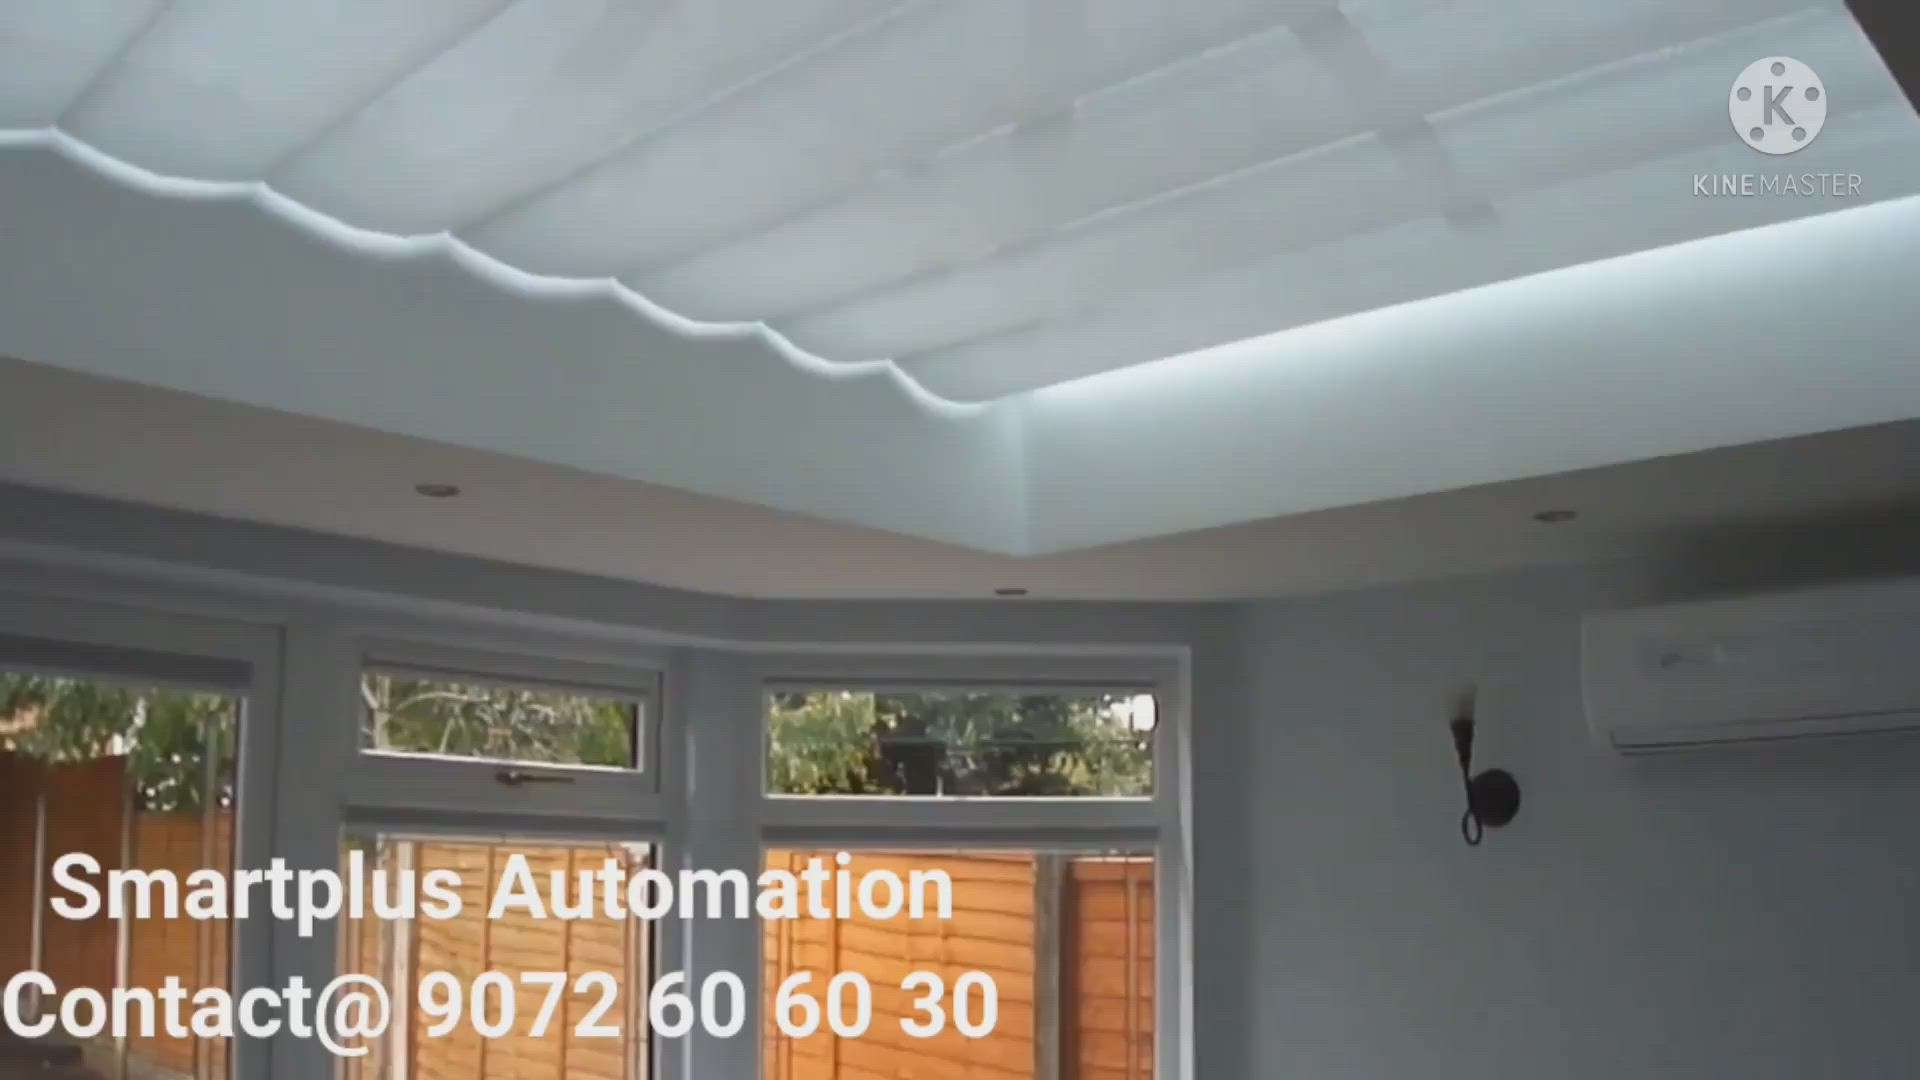 Remote controlled skylight blinds Roman blind.
#remote curtain